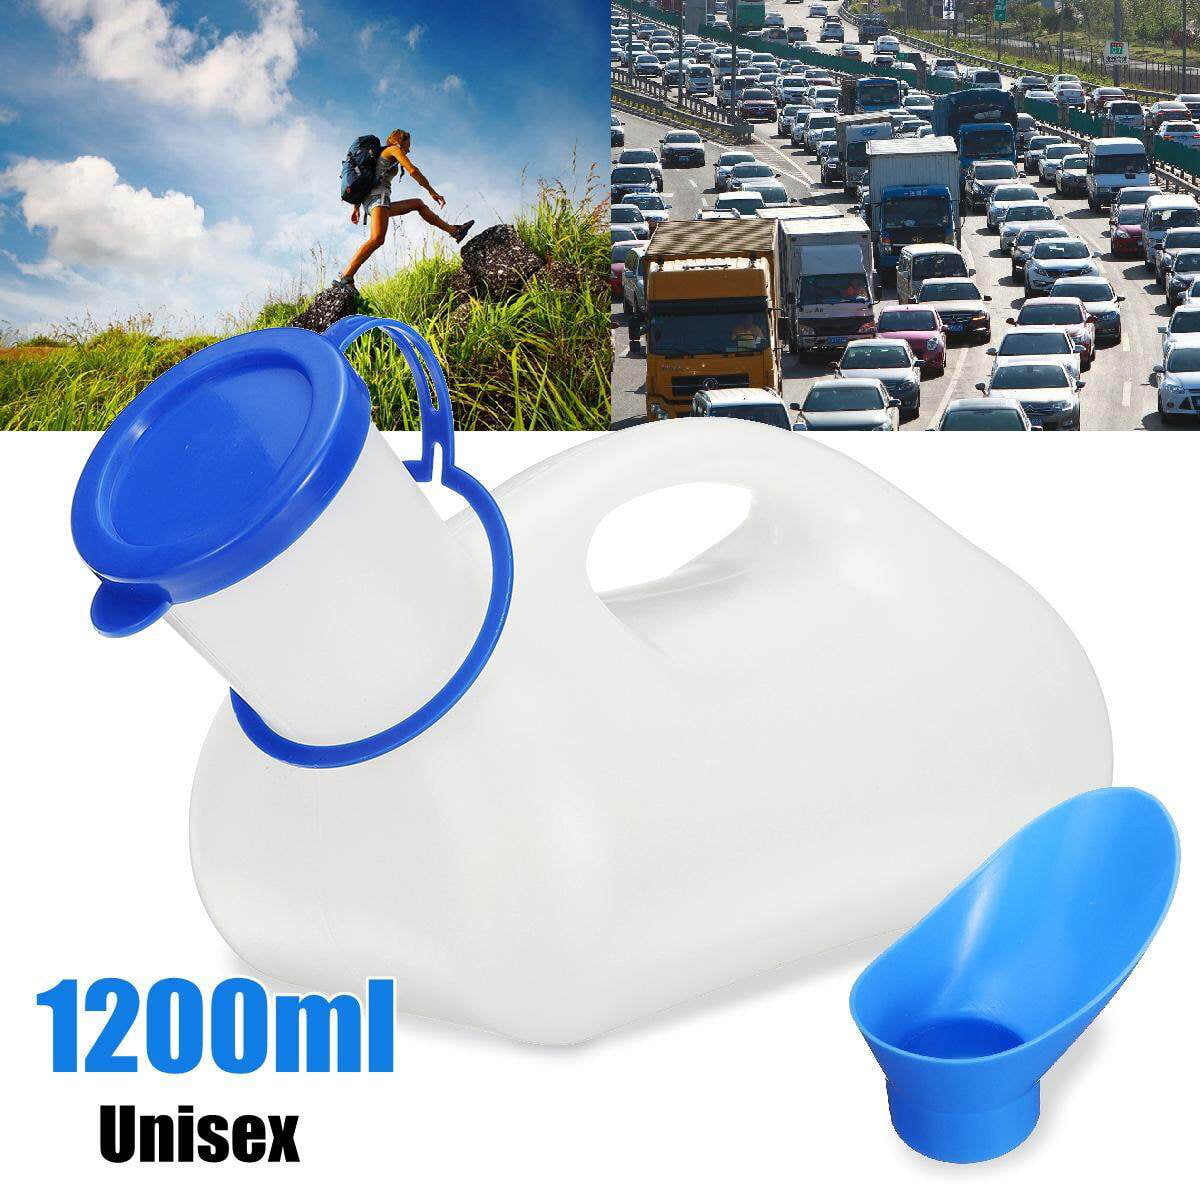 1x Portable Mobile Toilet Car Travel Journeys Camping Boats Urinal 